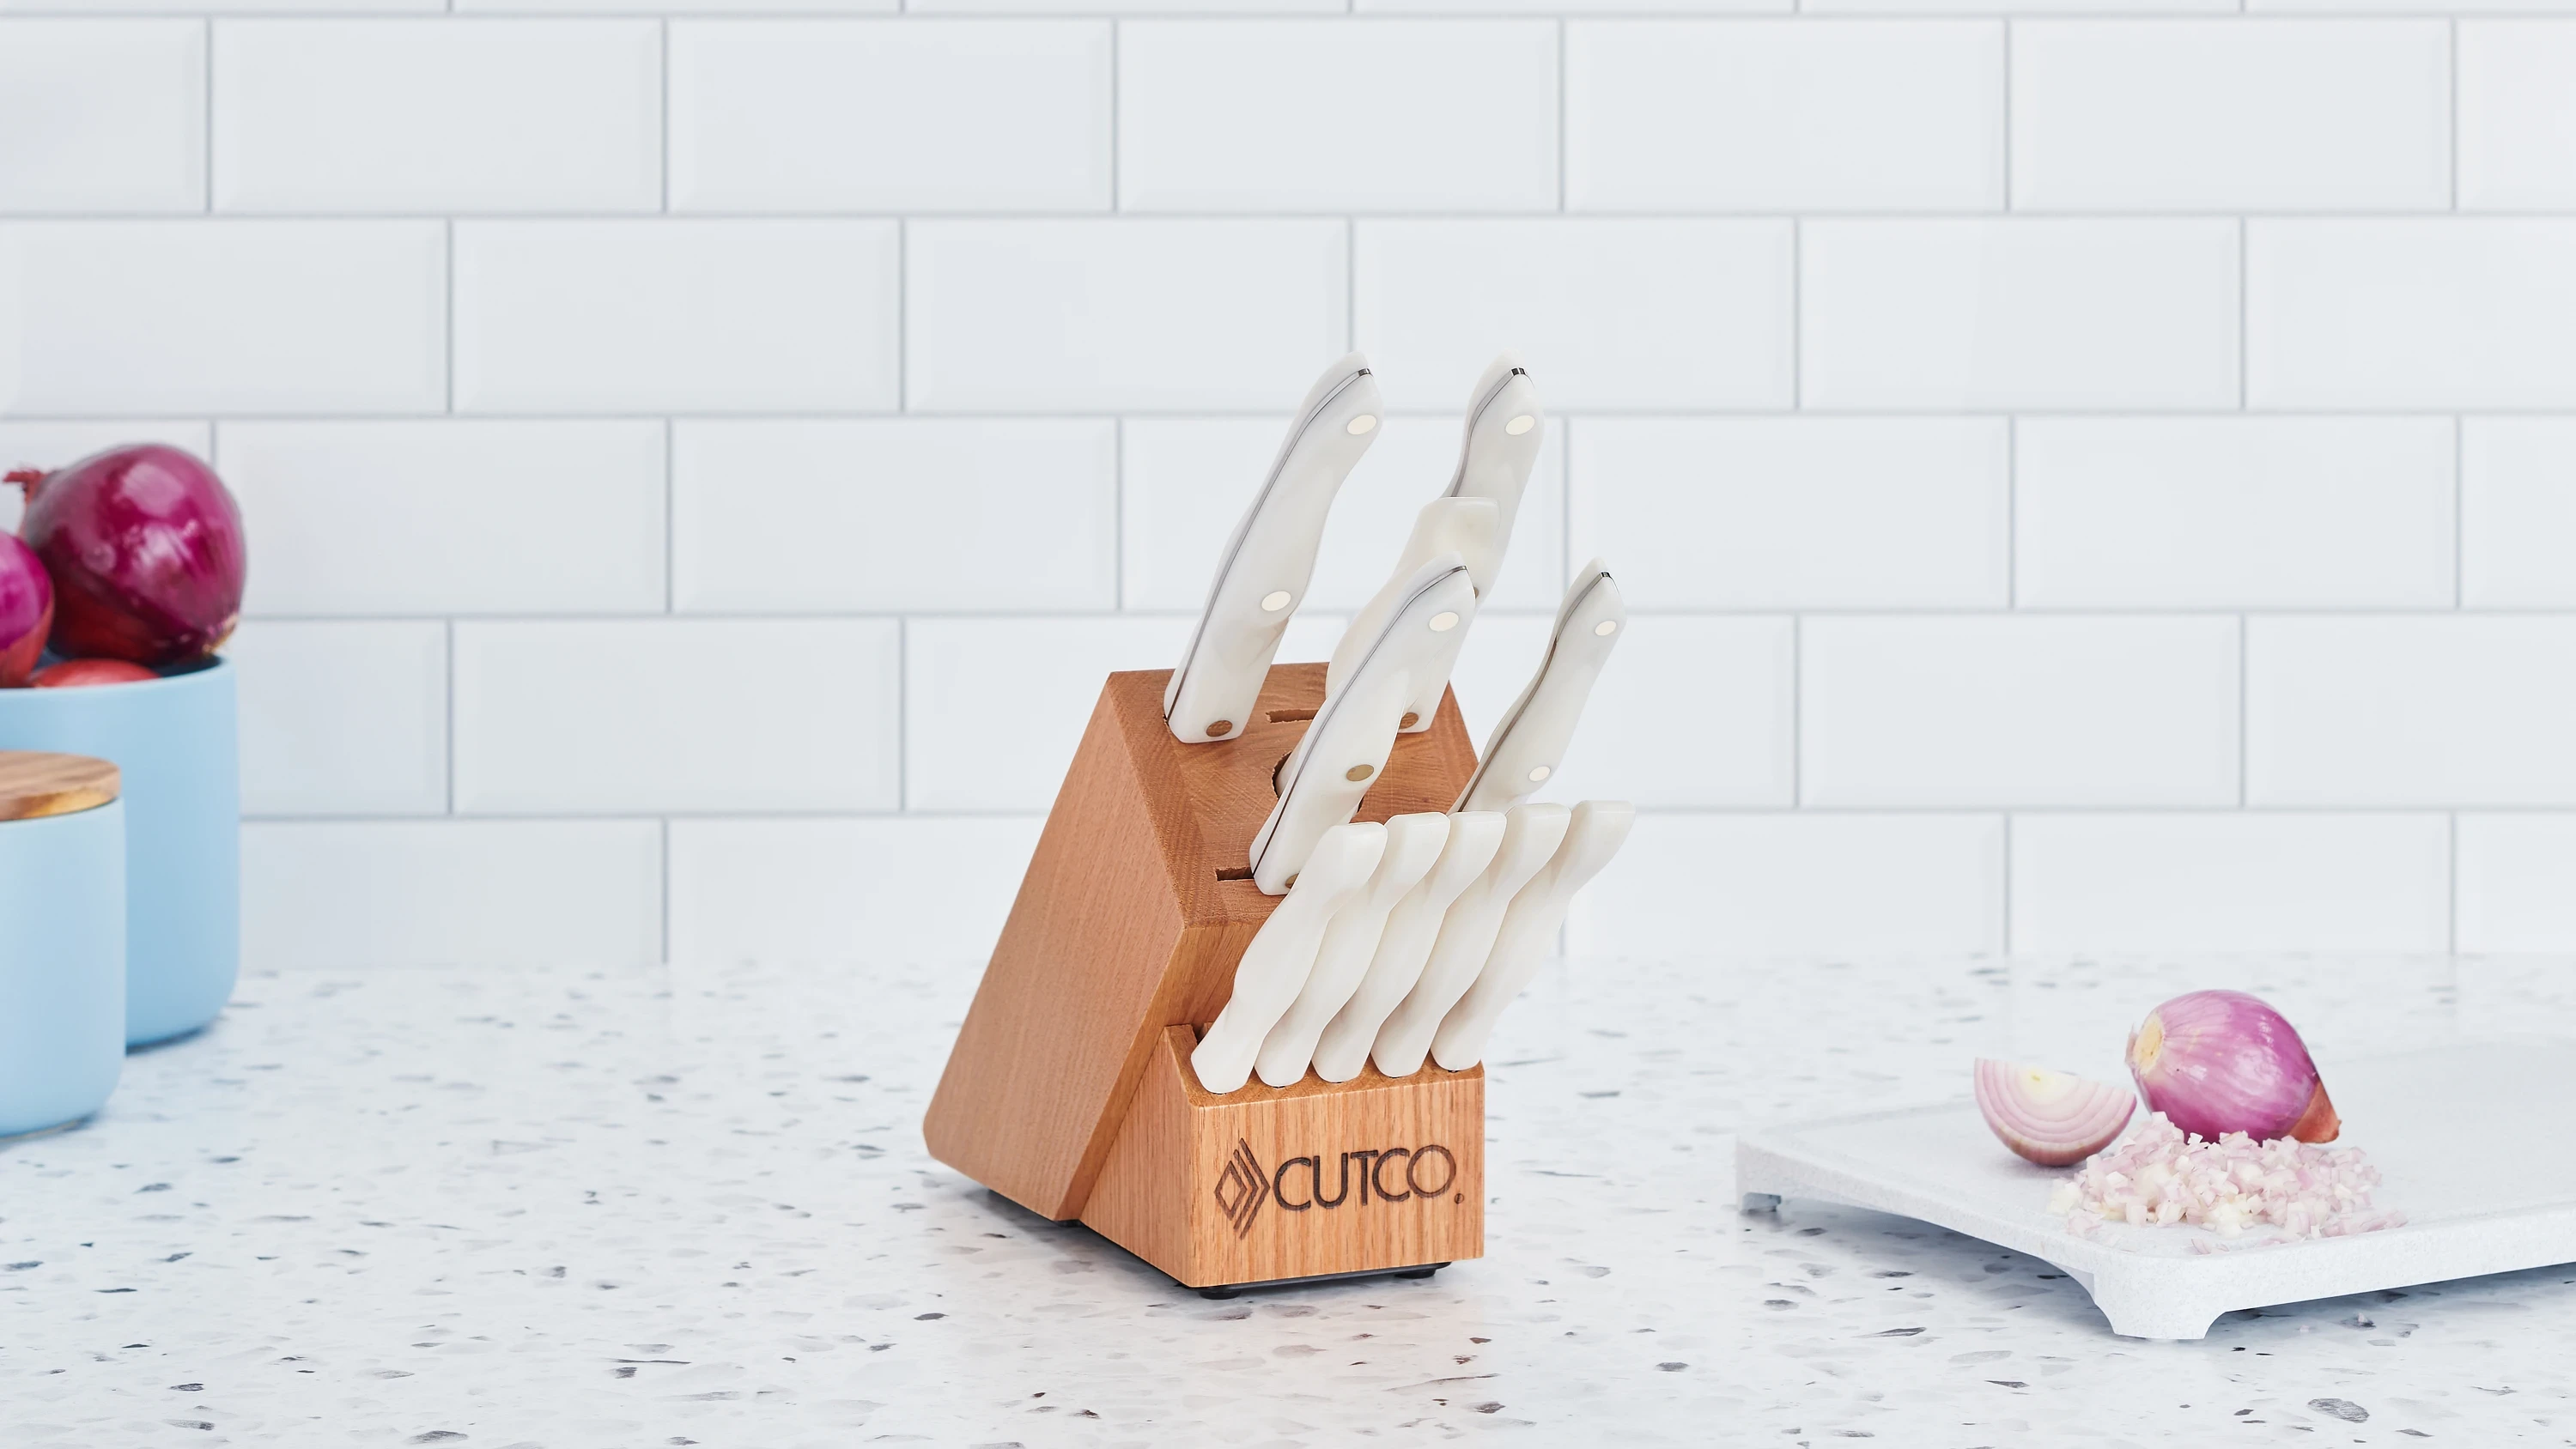 Slice, dice, mince, cut 🔪🥒 Our 12pc Knife Block Set can handle any  kitchen task with sophistication and style ✨